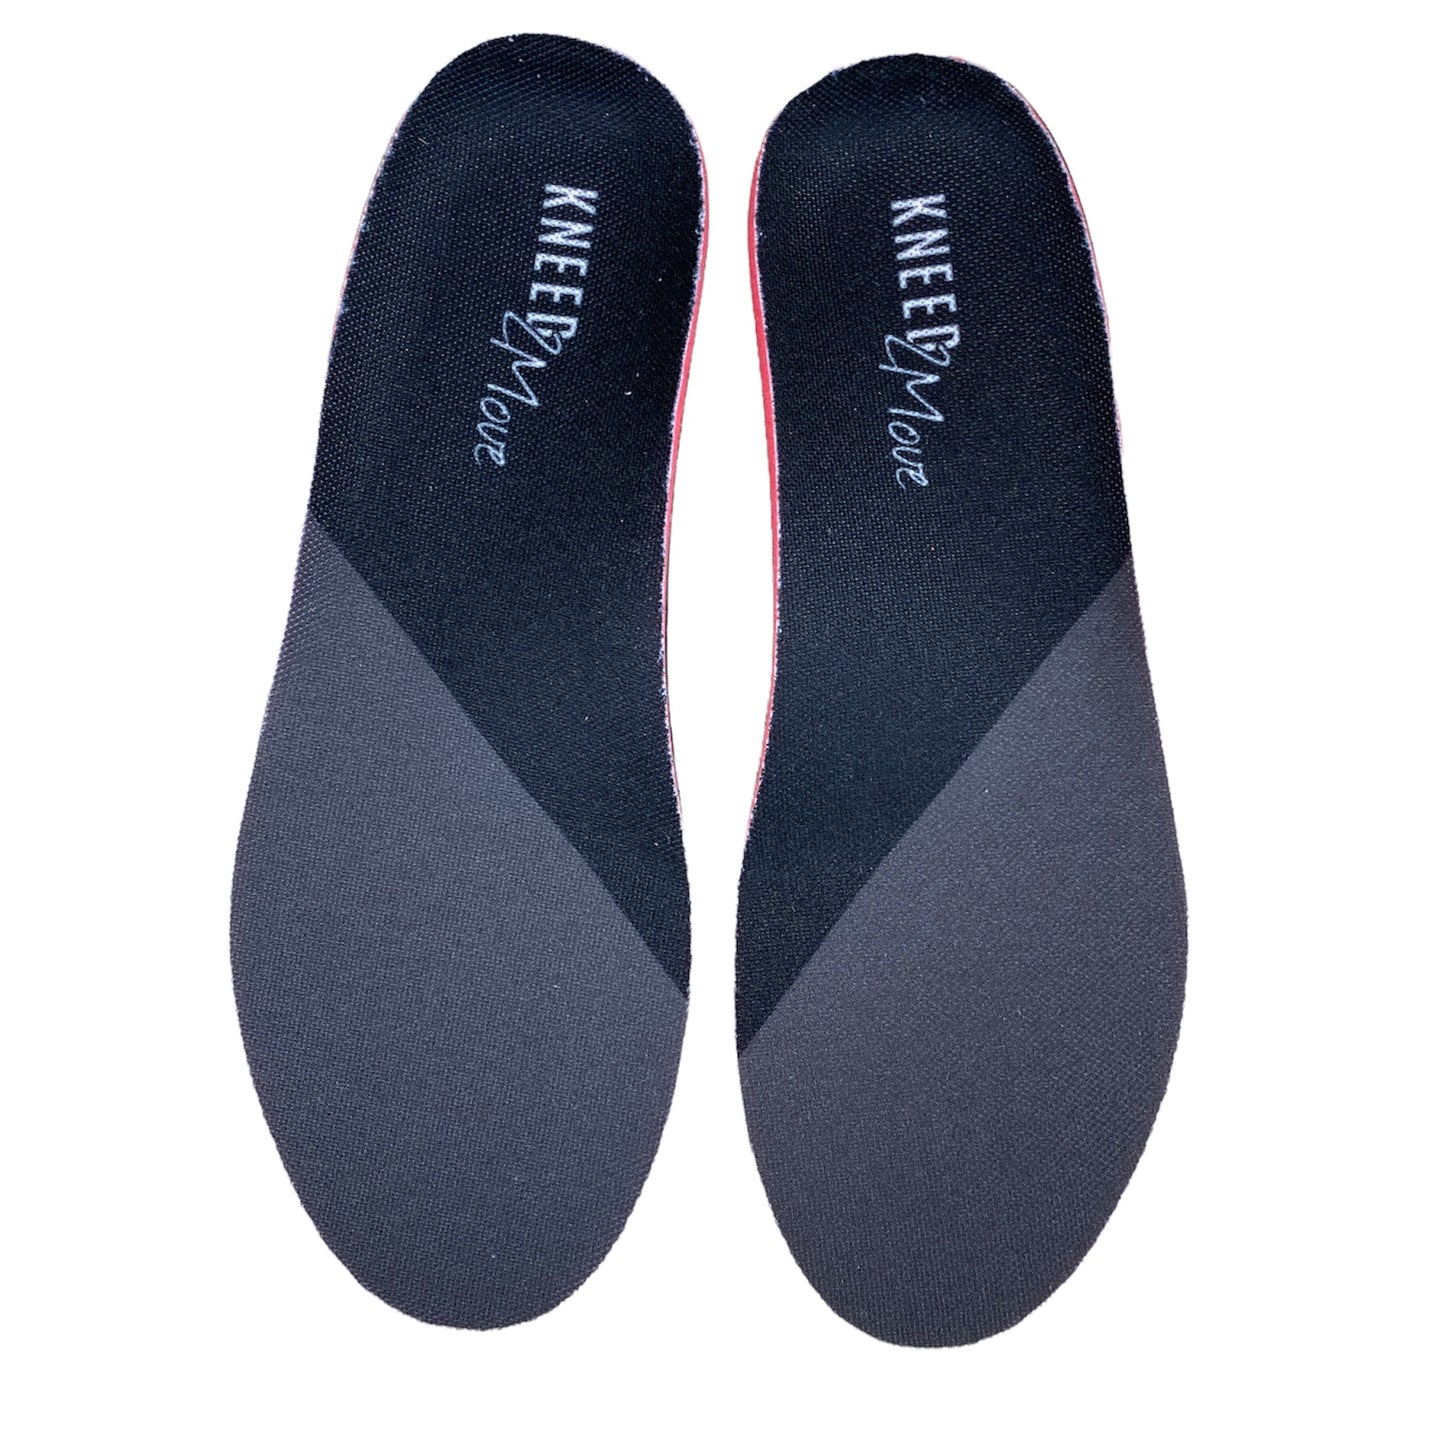 KNEED2Move Insole